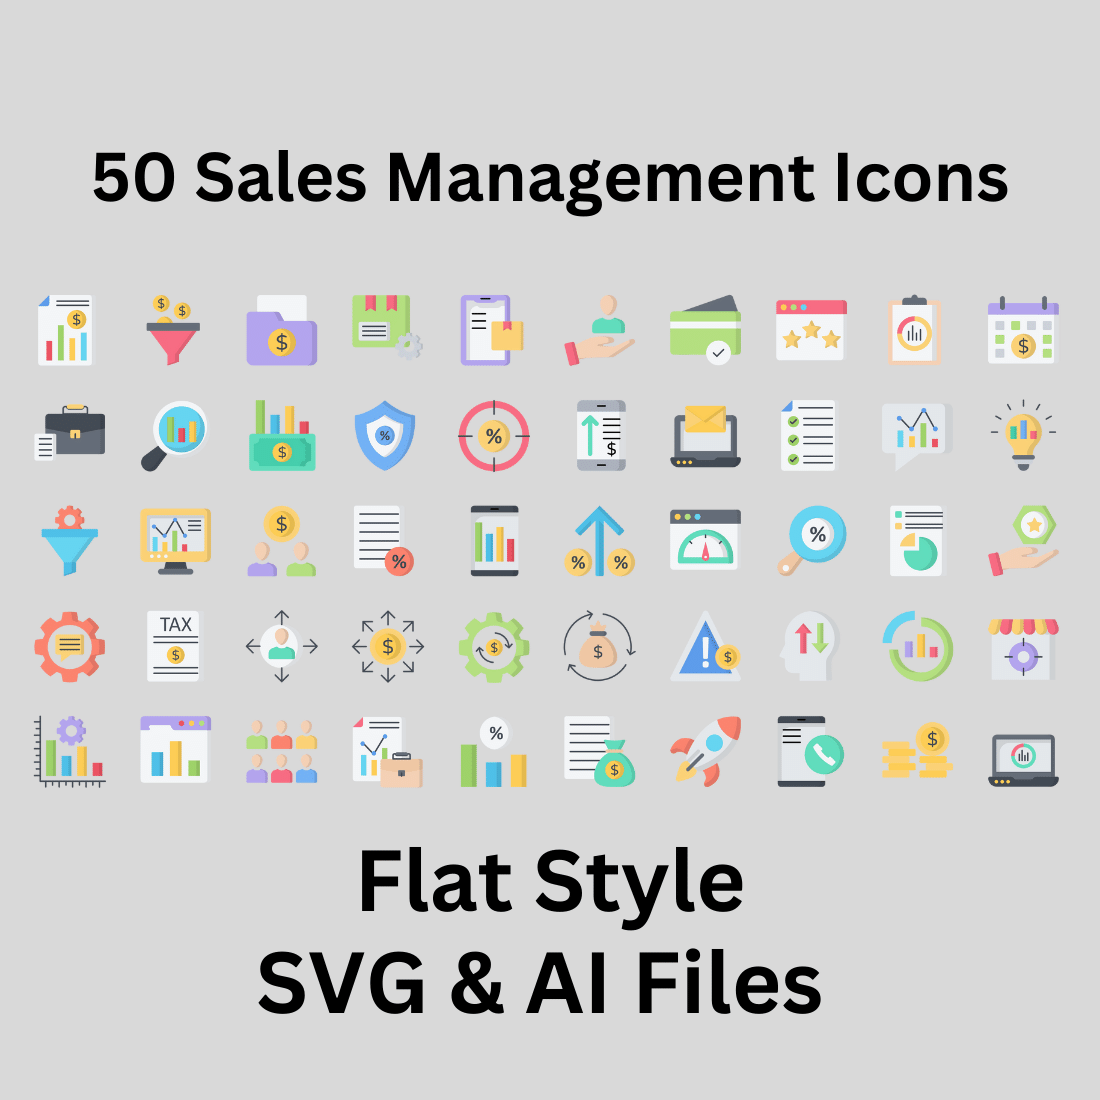 Sales Management Icon Set 50 Flat Icons - SVG And AI Files preview image.